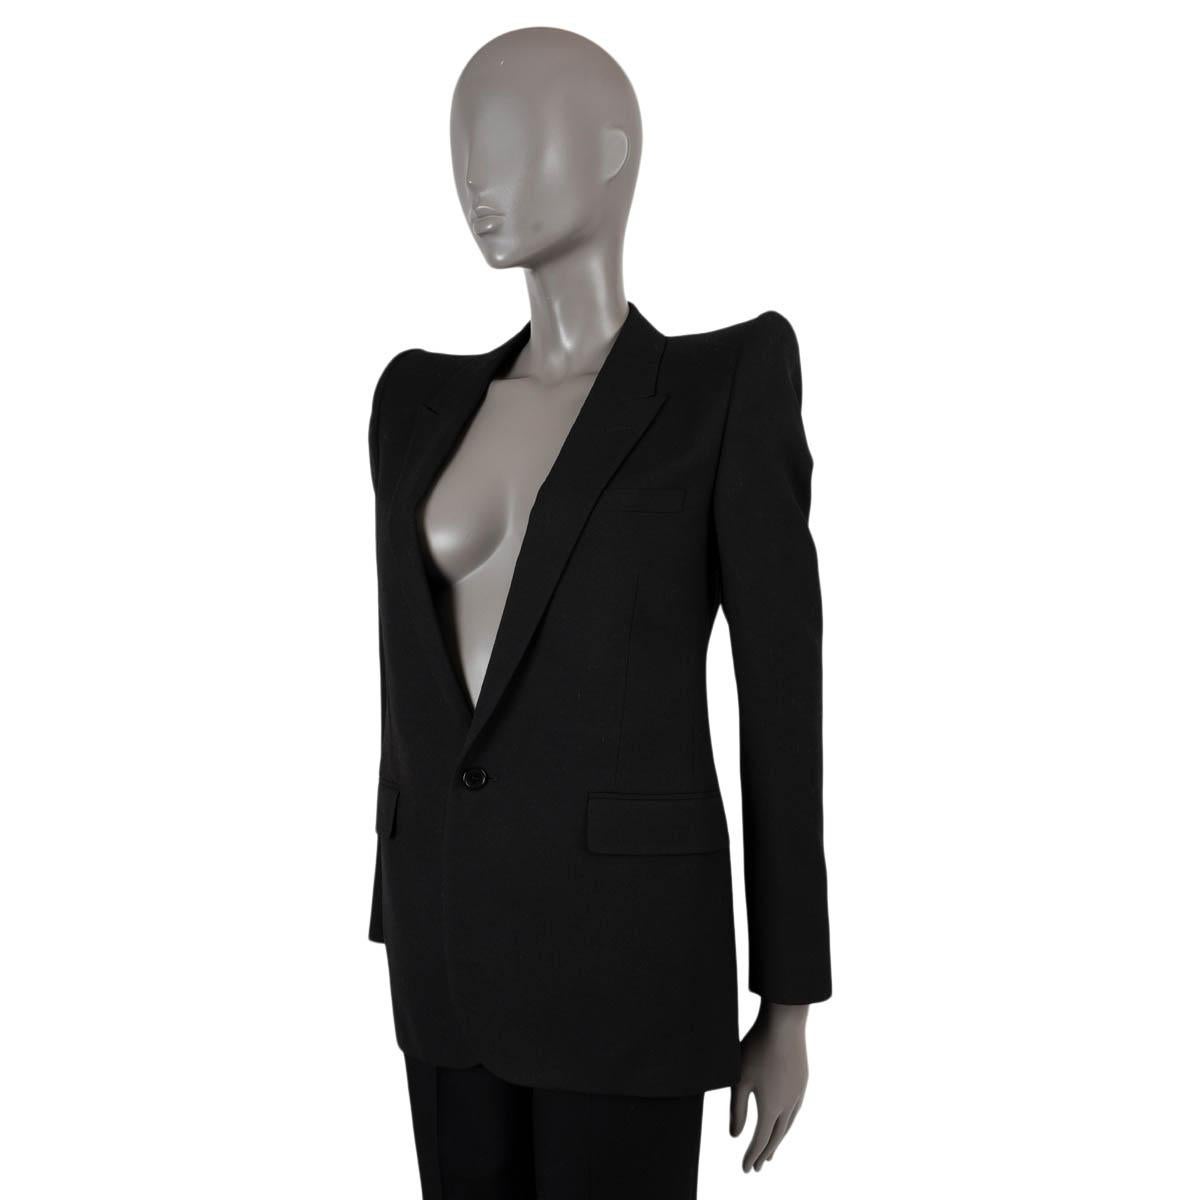 100% authentic Saint Laurent padded shoulder blazer in black wool (100%). Features an expressive shoulder, two front flap pockets and a chest pocket. Opens with one button on the front. Lined in black silk (100%). Has been worn and is in excellent